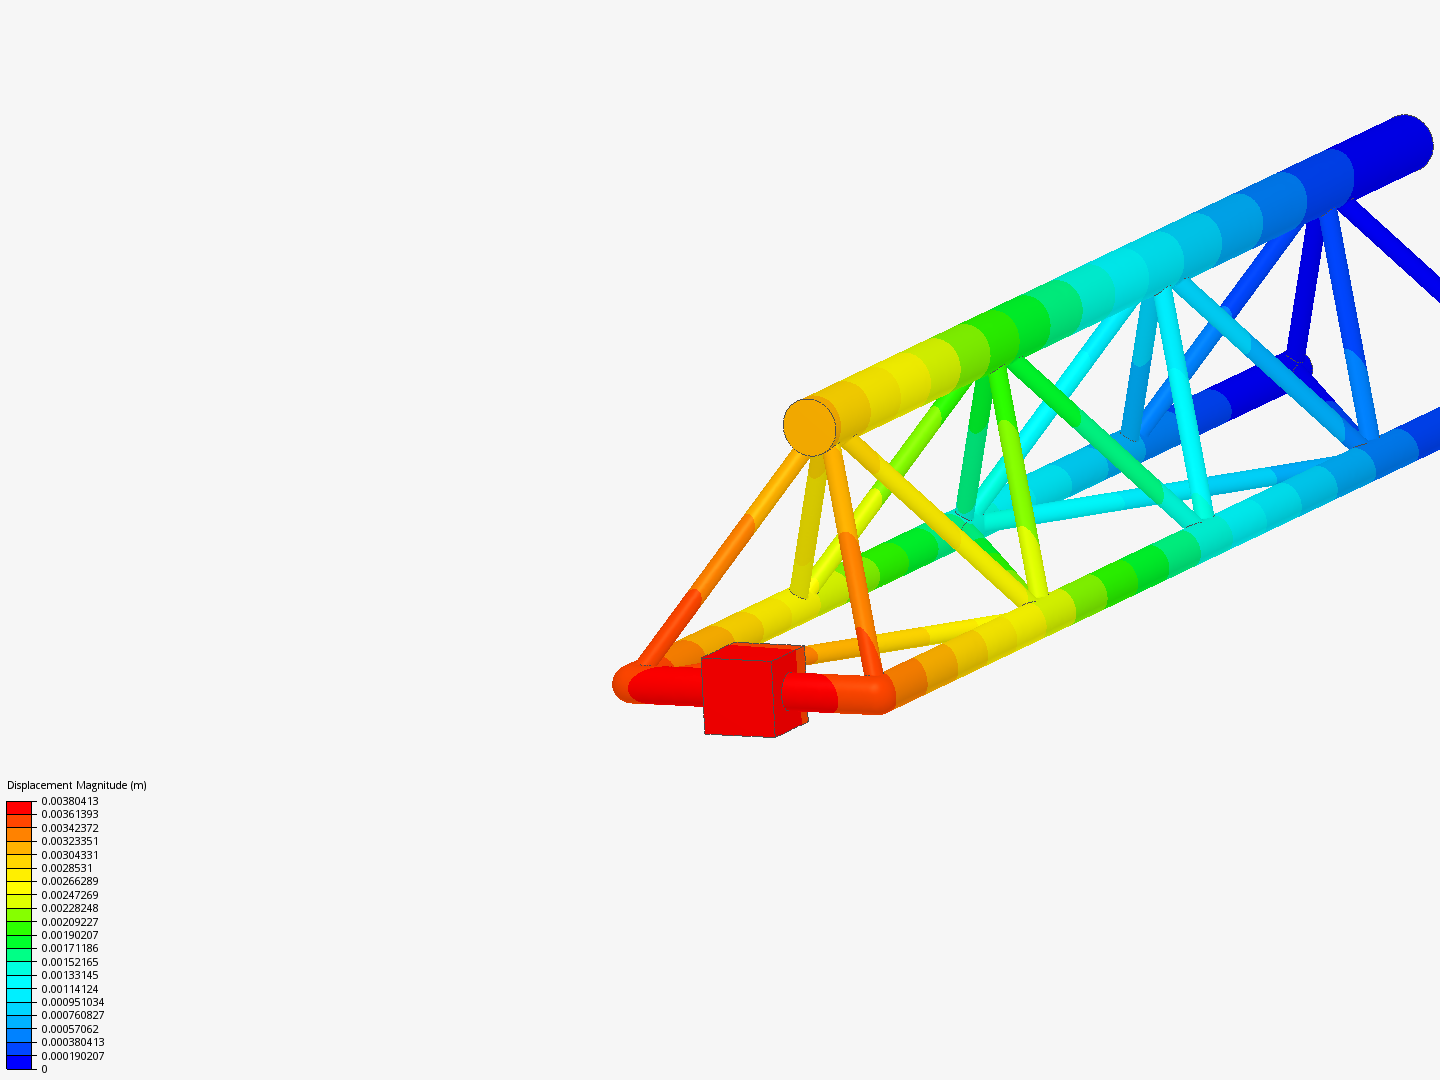 Tutorial - Linear static analysis of a crane image